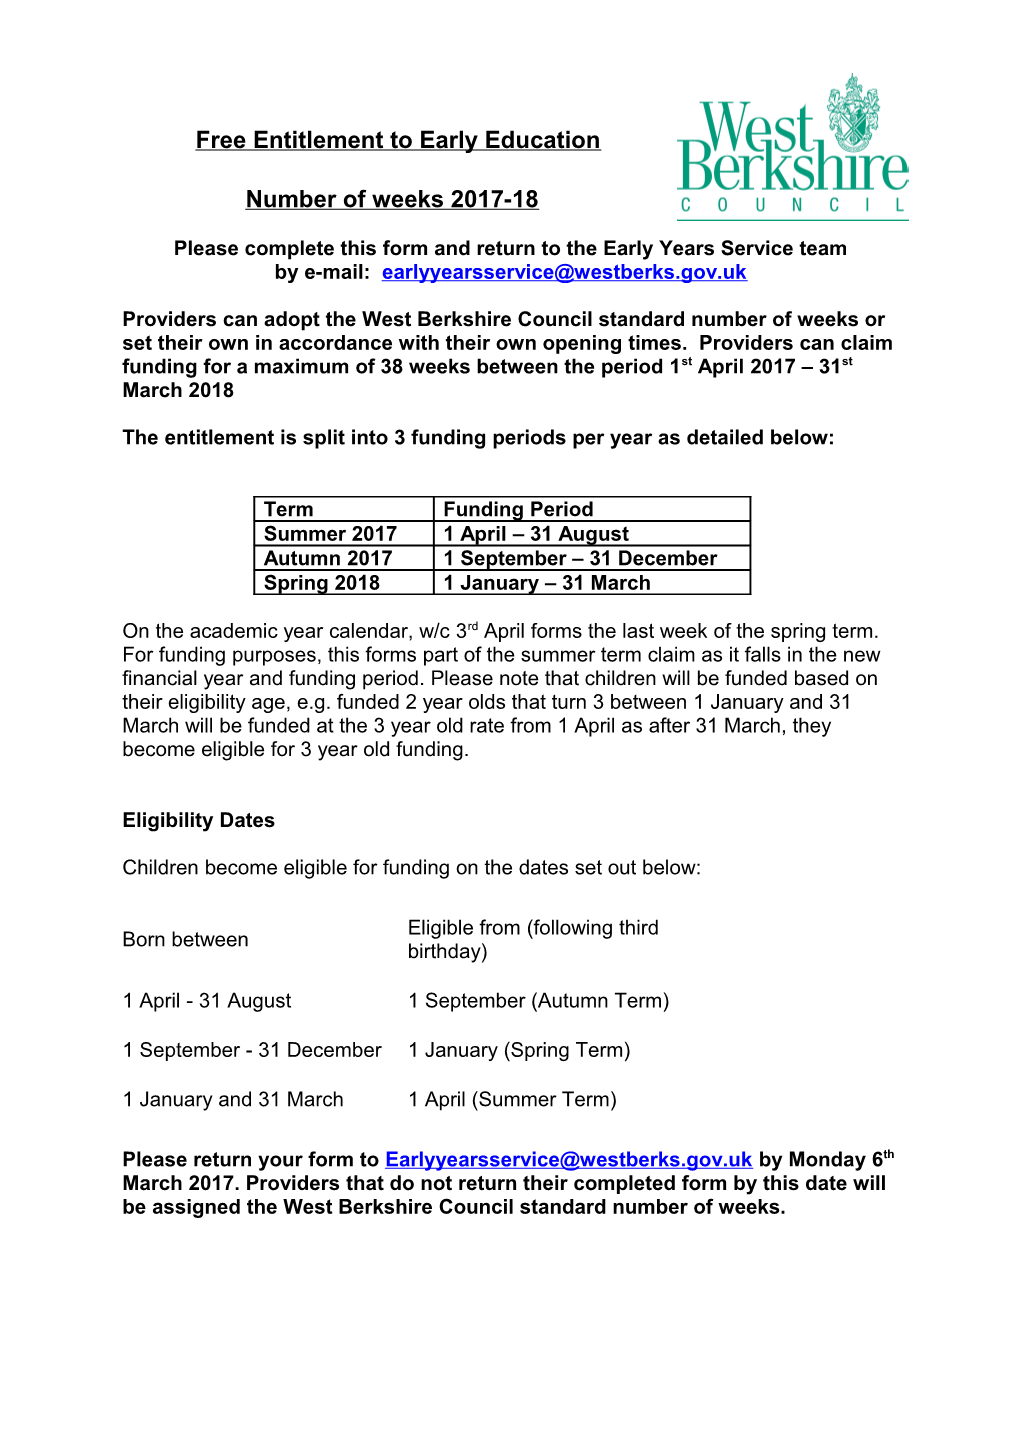 Please Complete This Form and Return to the Early Years Service Team